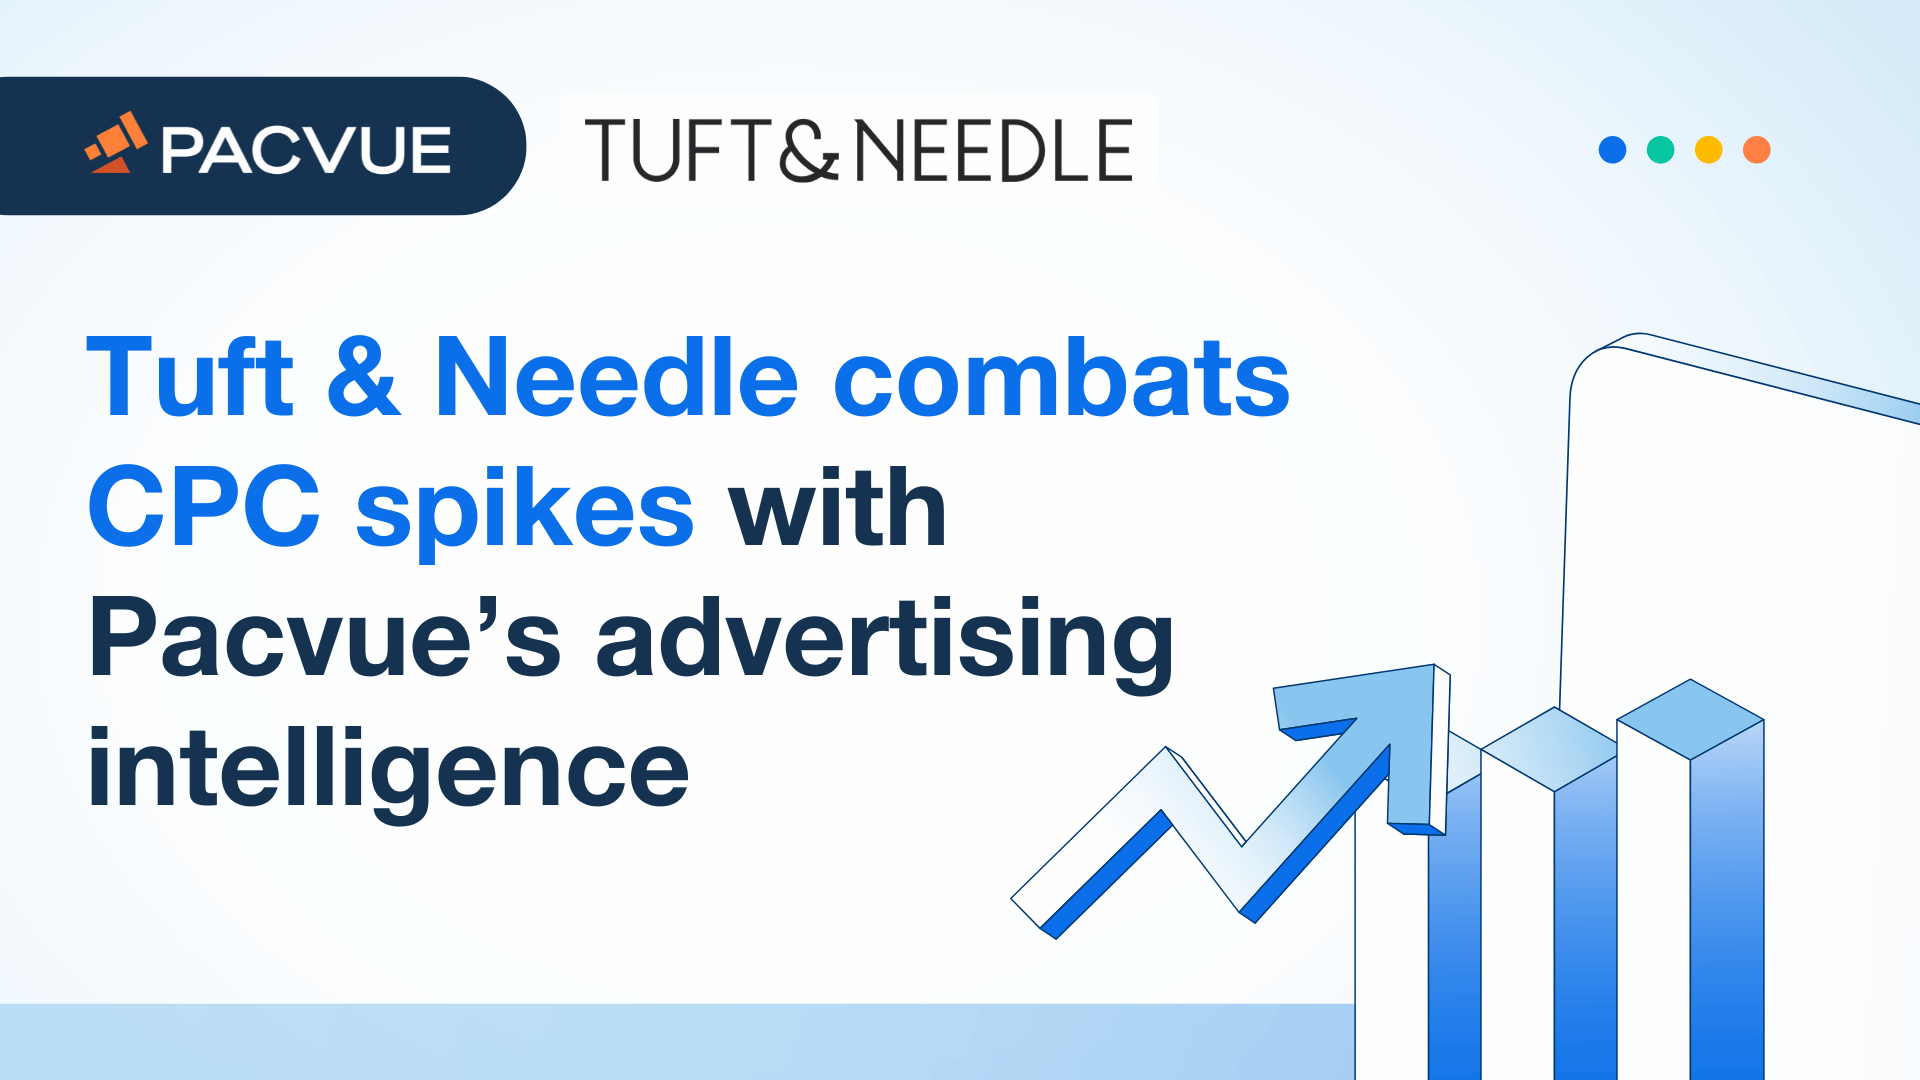 Tuft & Needle combats CPC spikes with Pacvue's advertising intelligence